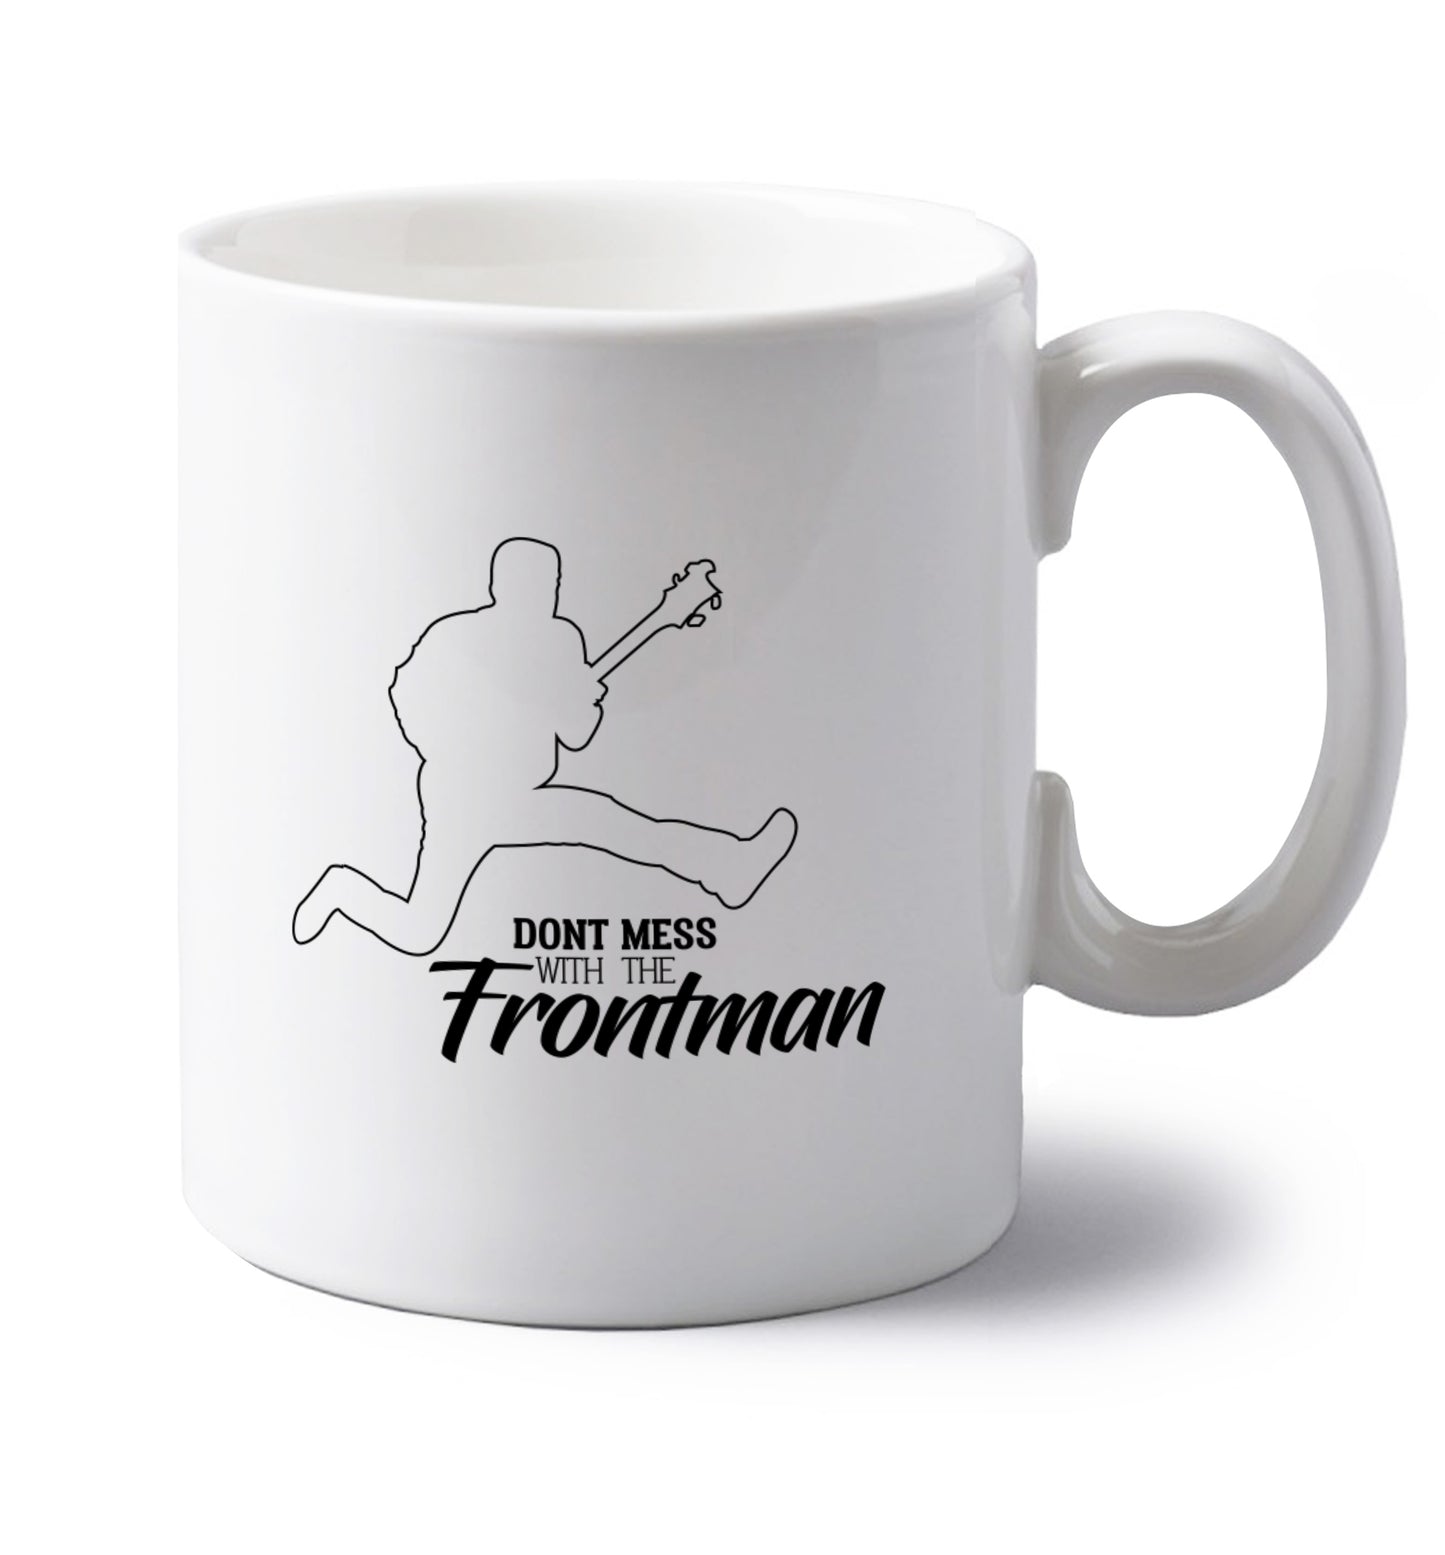 Don't mess with the frontman left handed white ceramic mug 